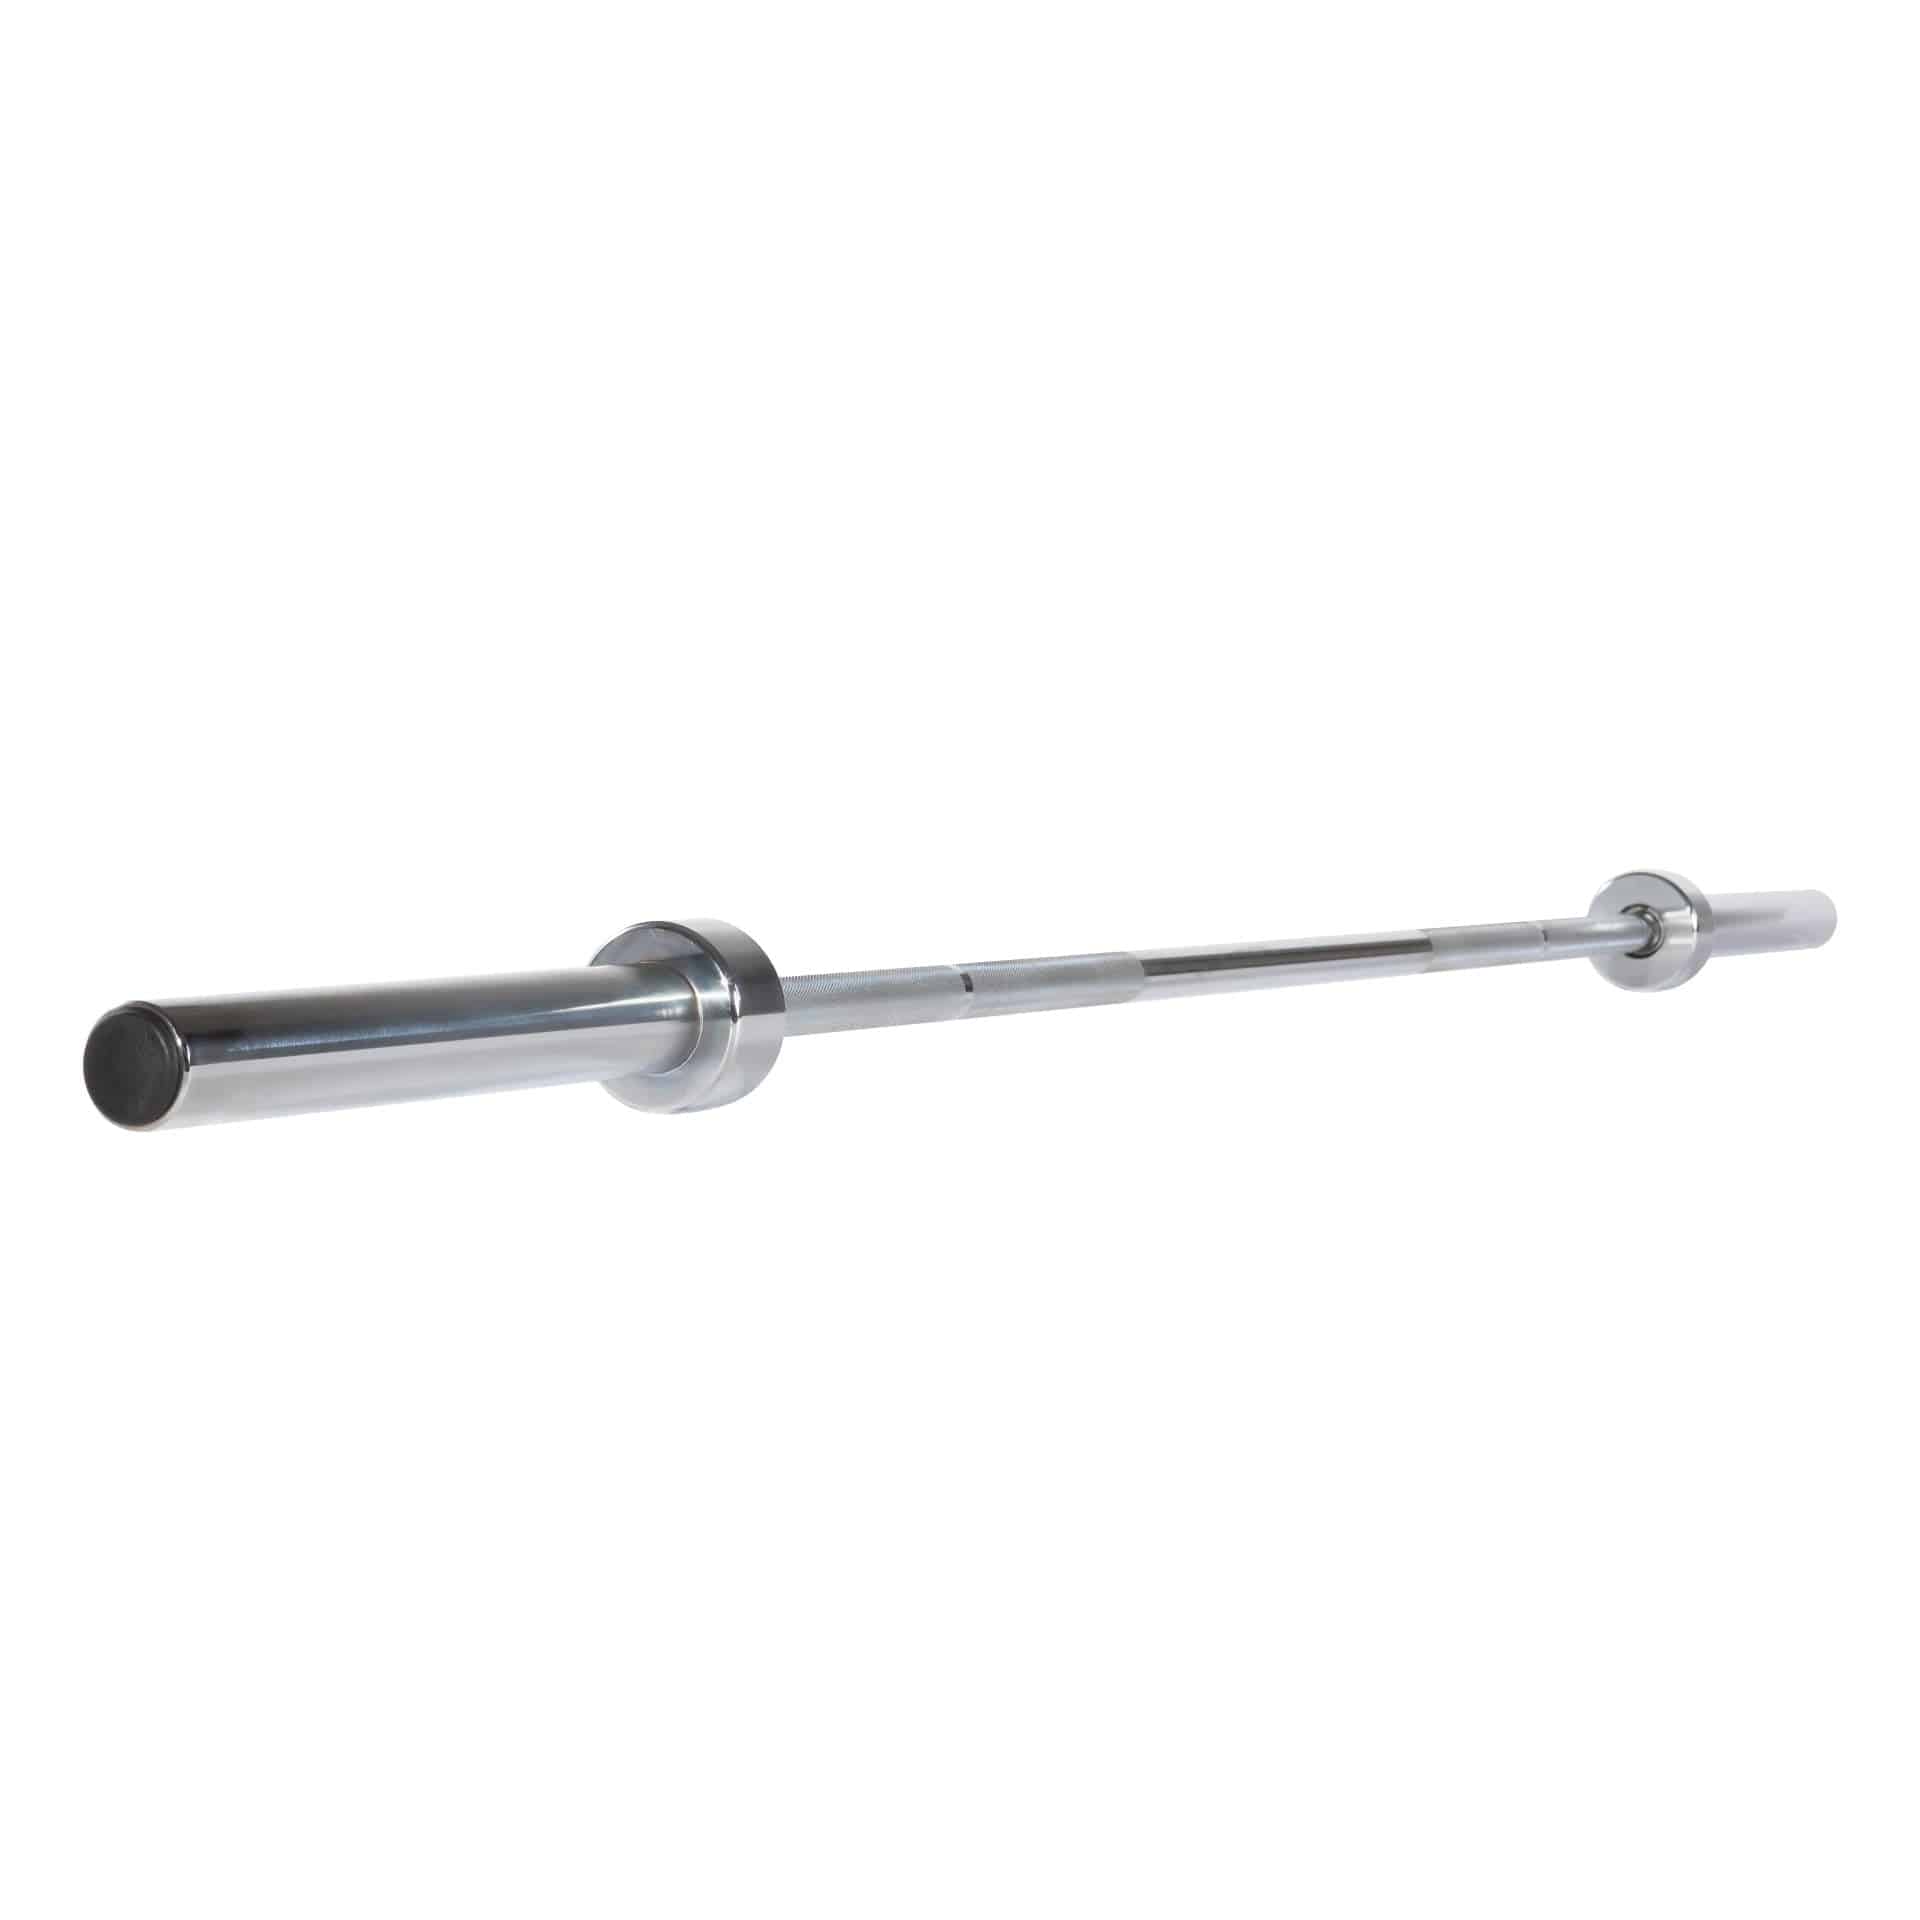 York Barbell | Olympic Bar 1000lb Rated - 7ft - XTC Fitness - Exercise Equipment Superstore - Canada - Multi-Purpose Barbell